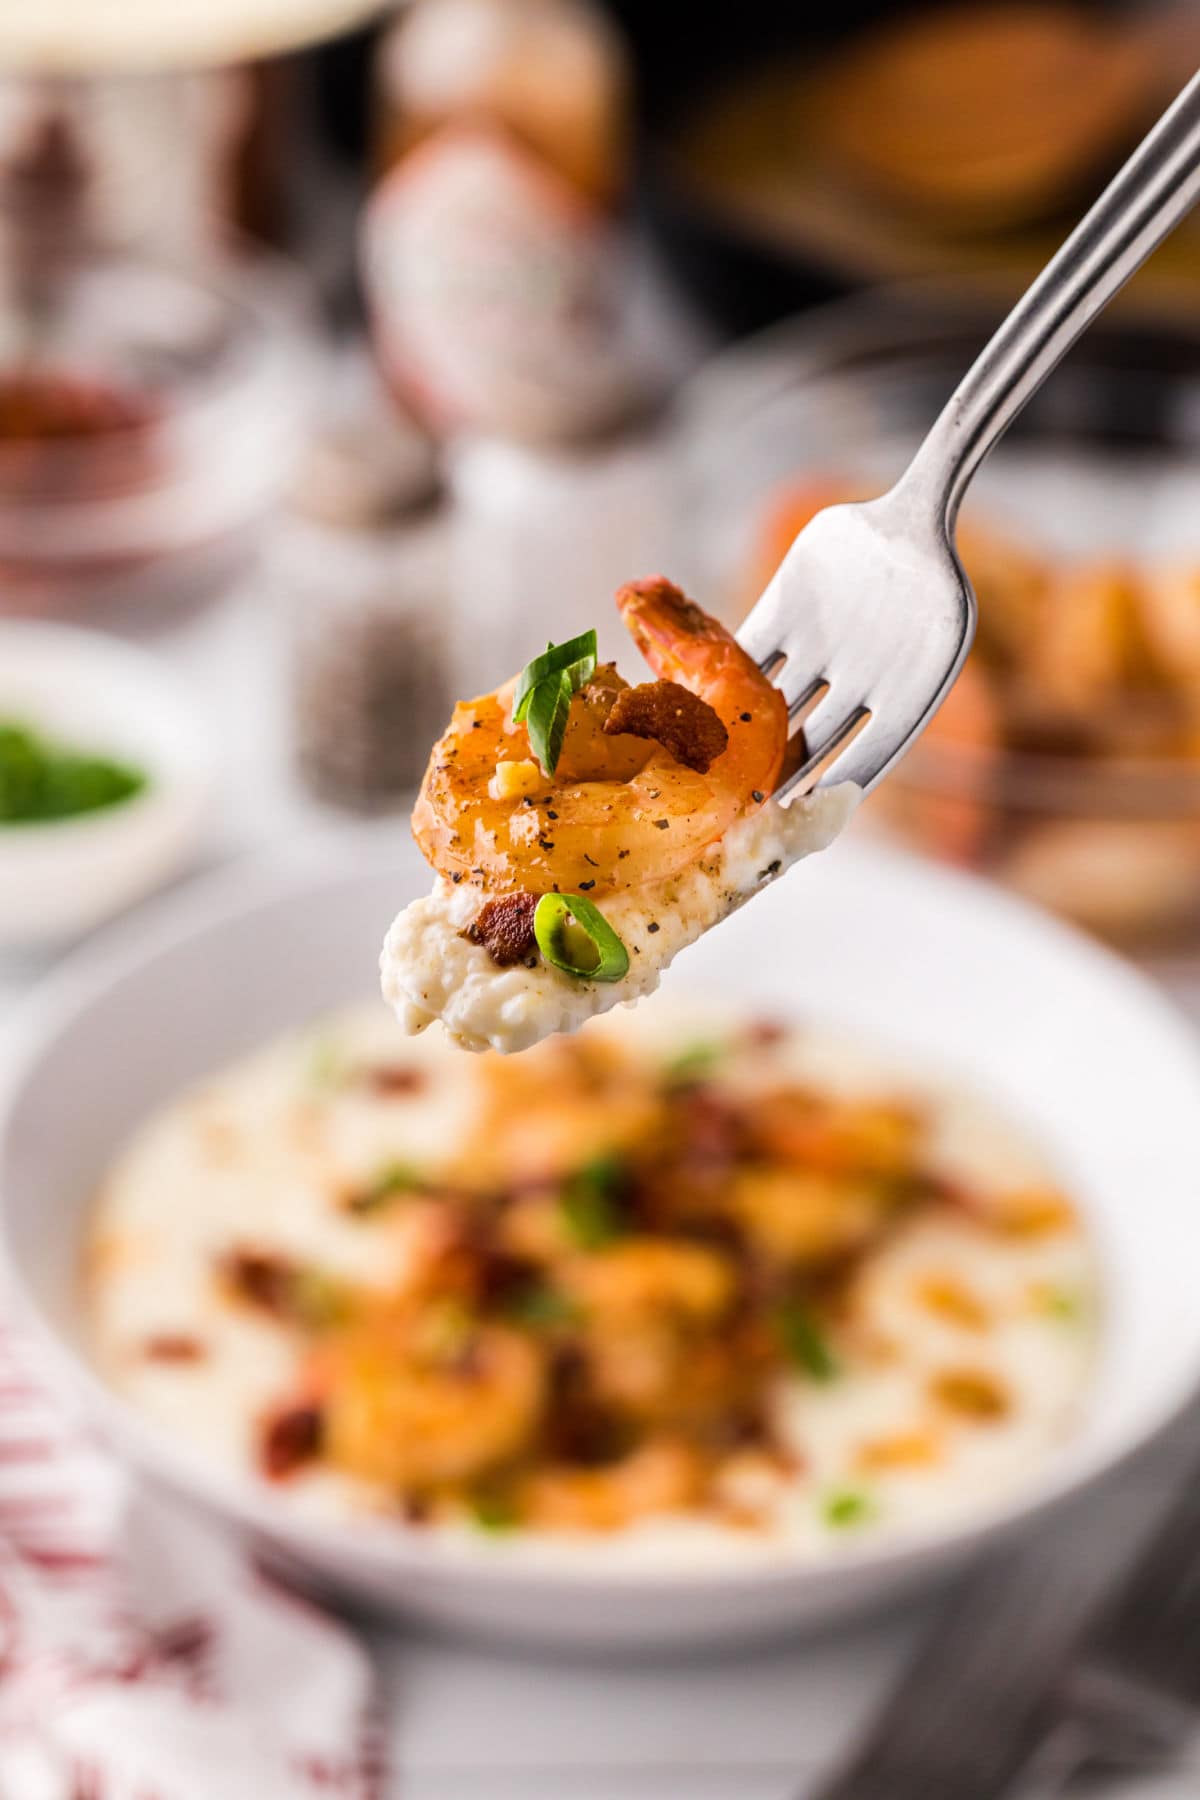 A fork lifting a bite of shrimp and grits from a bowl